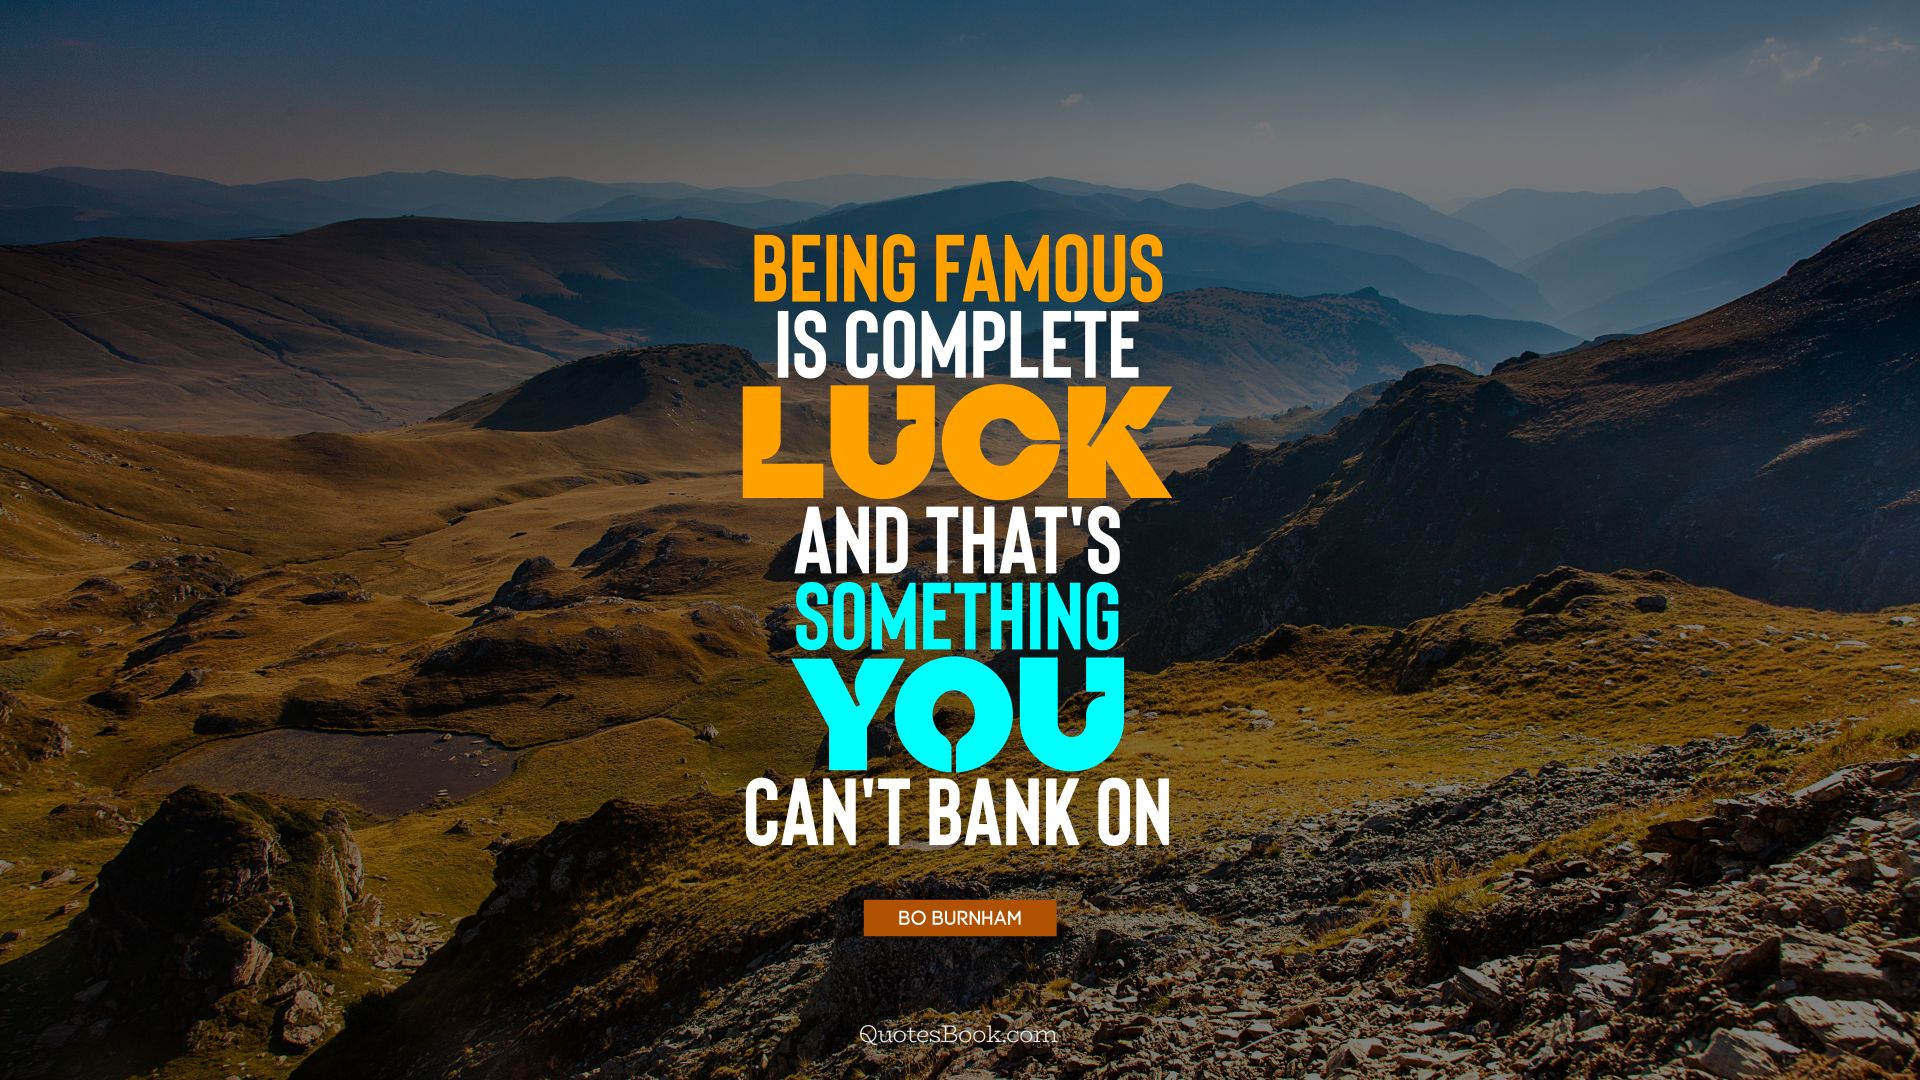 Being famous is complete luck, and that's something you can't bank on. - Quote by Bo Burnham